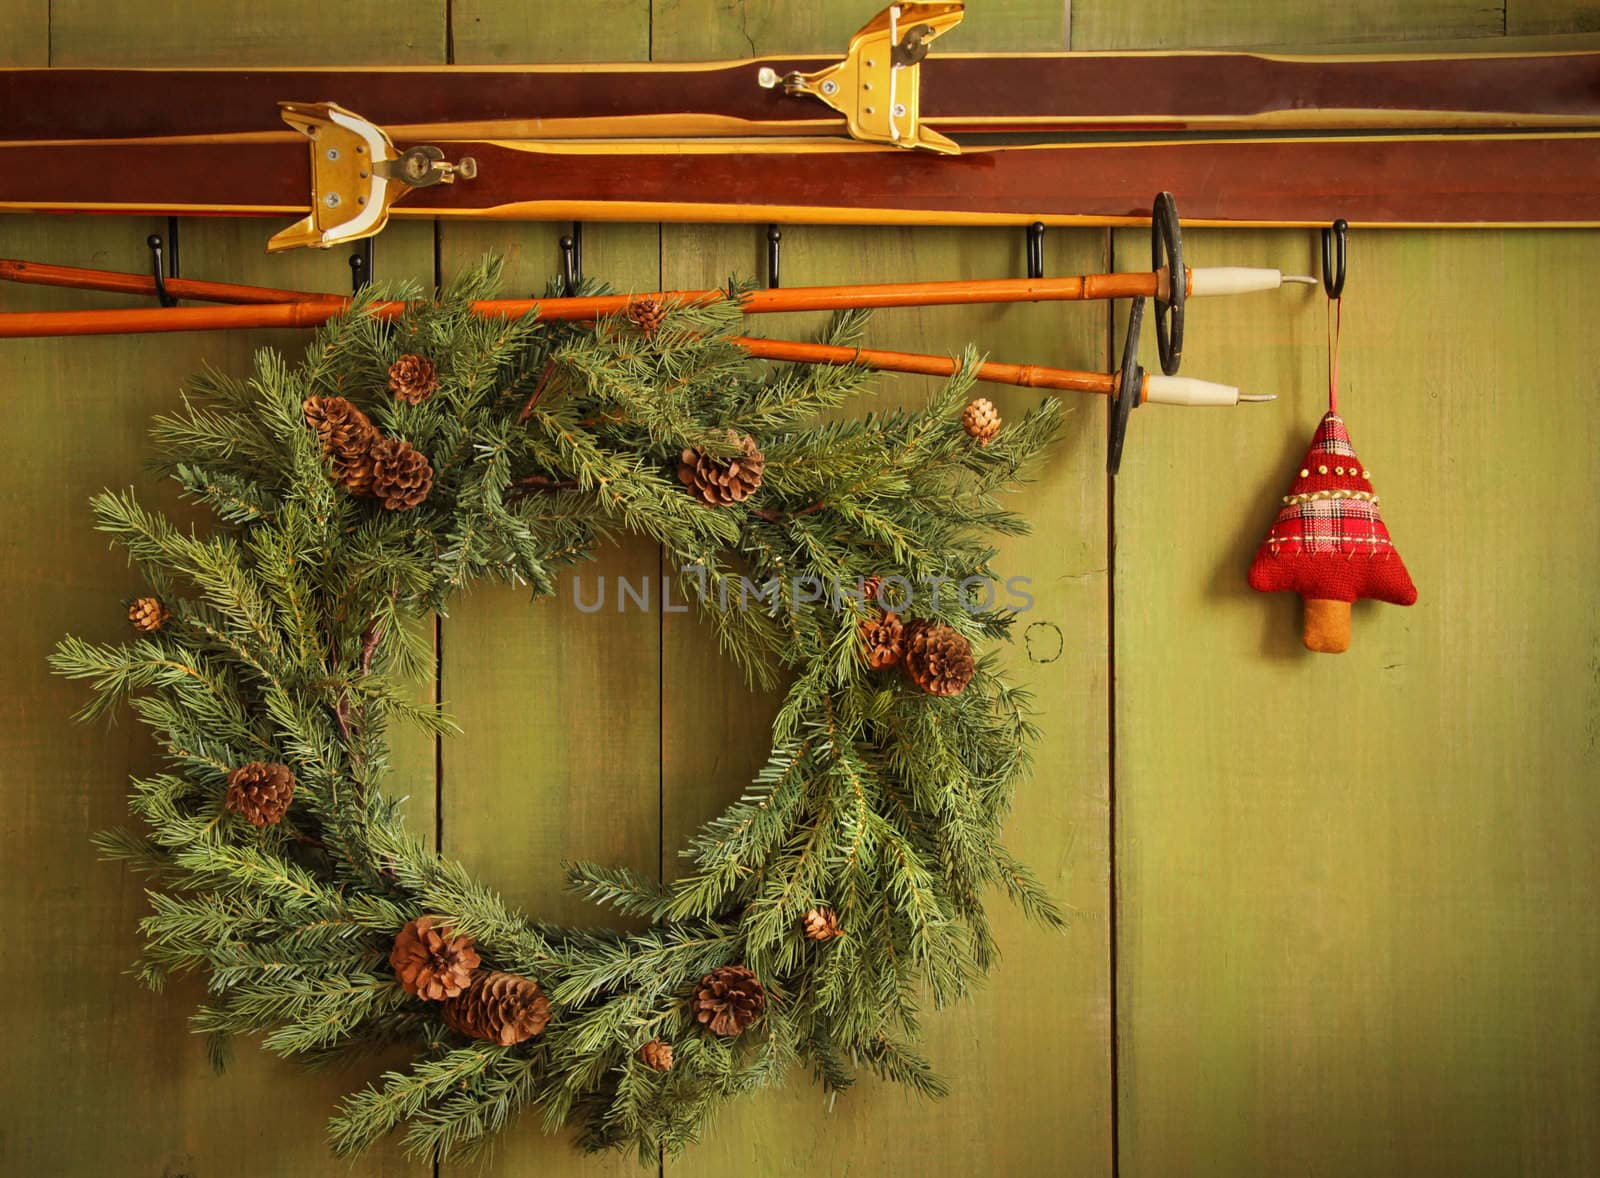 Old pair of skis hanging with wreath against green wood background